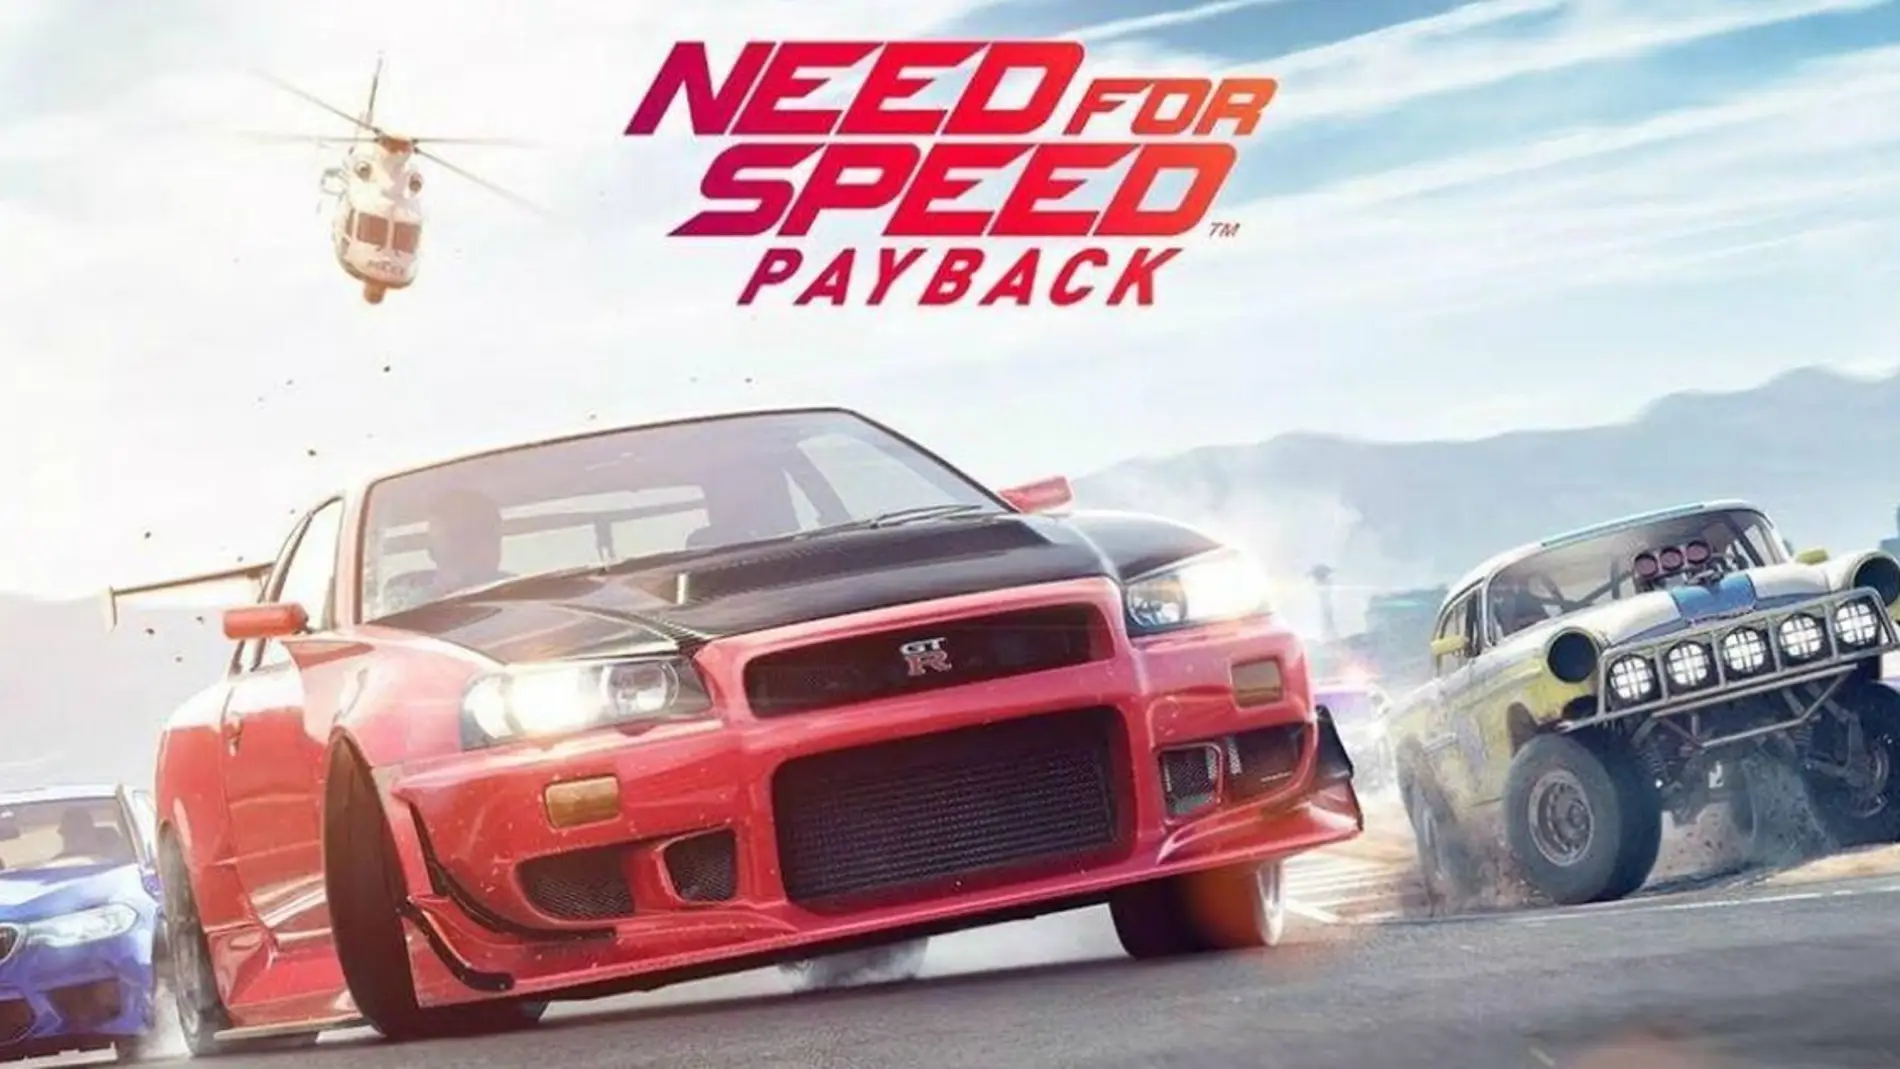 need-for-speed-payback-trailer-0517-01.jpg